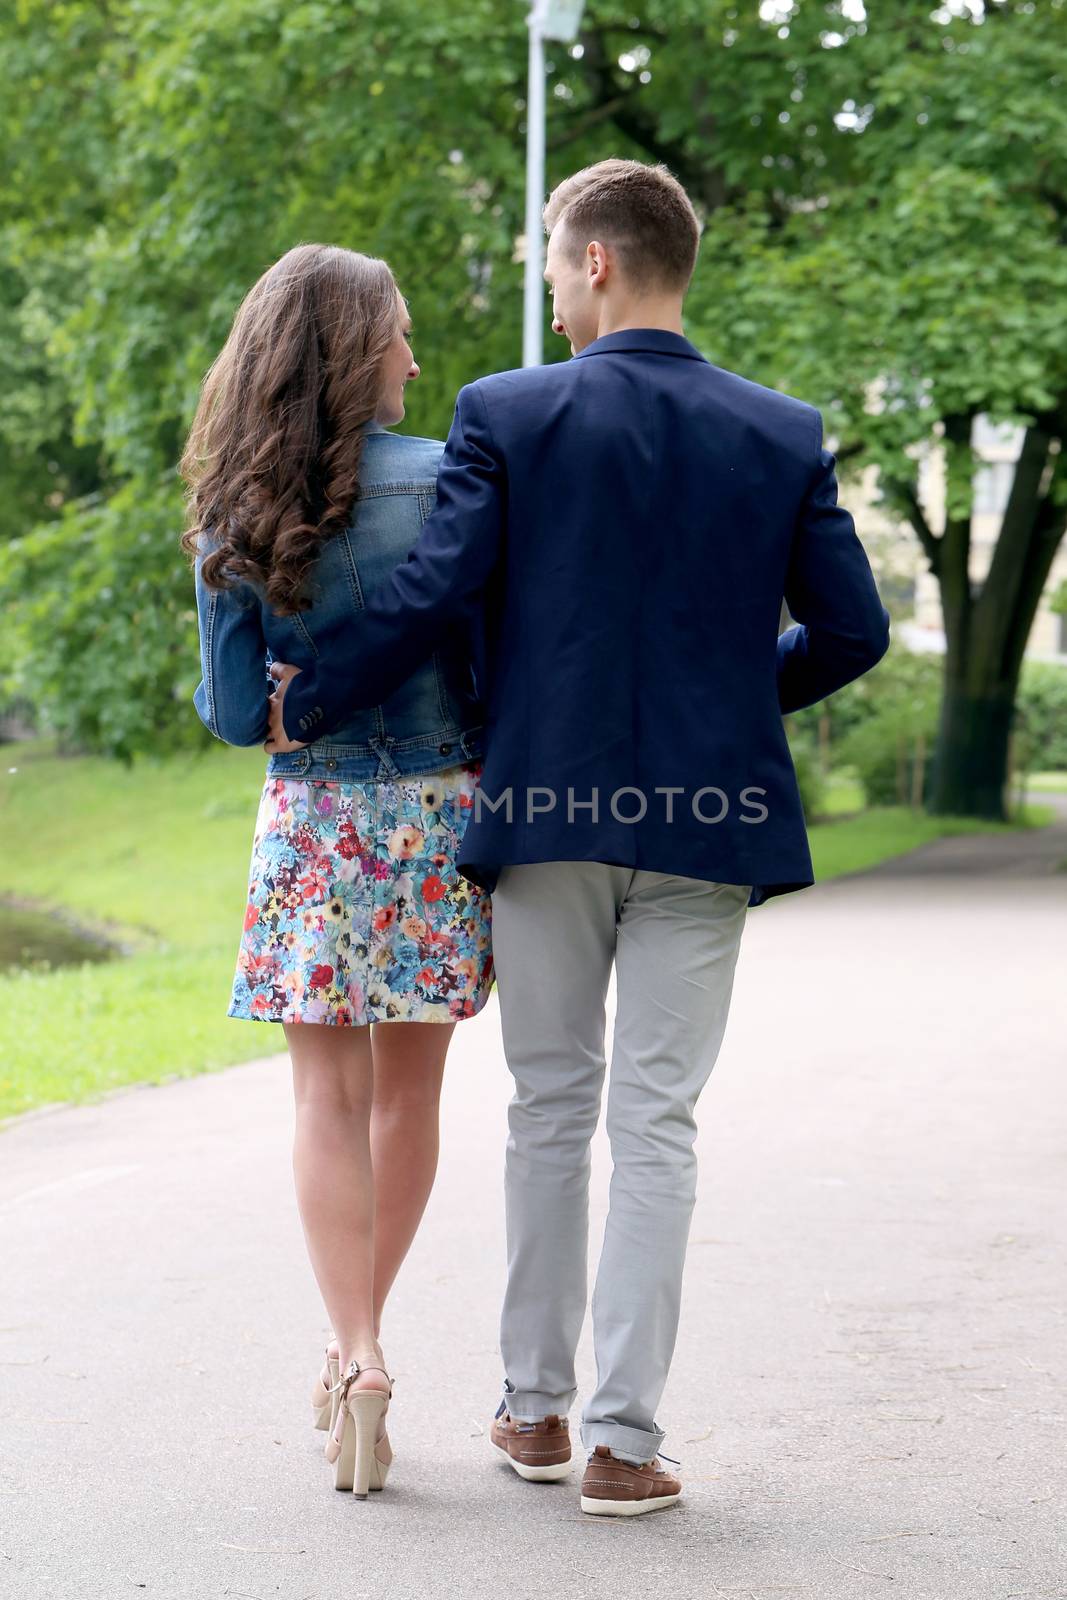 Cute, young couple in the park